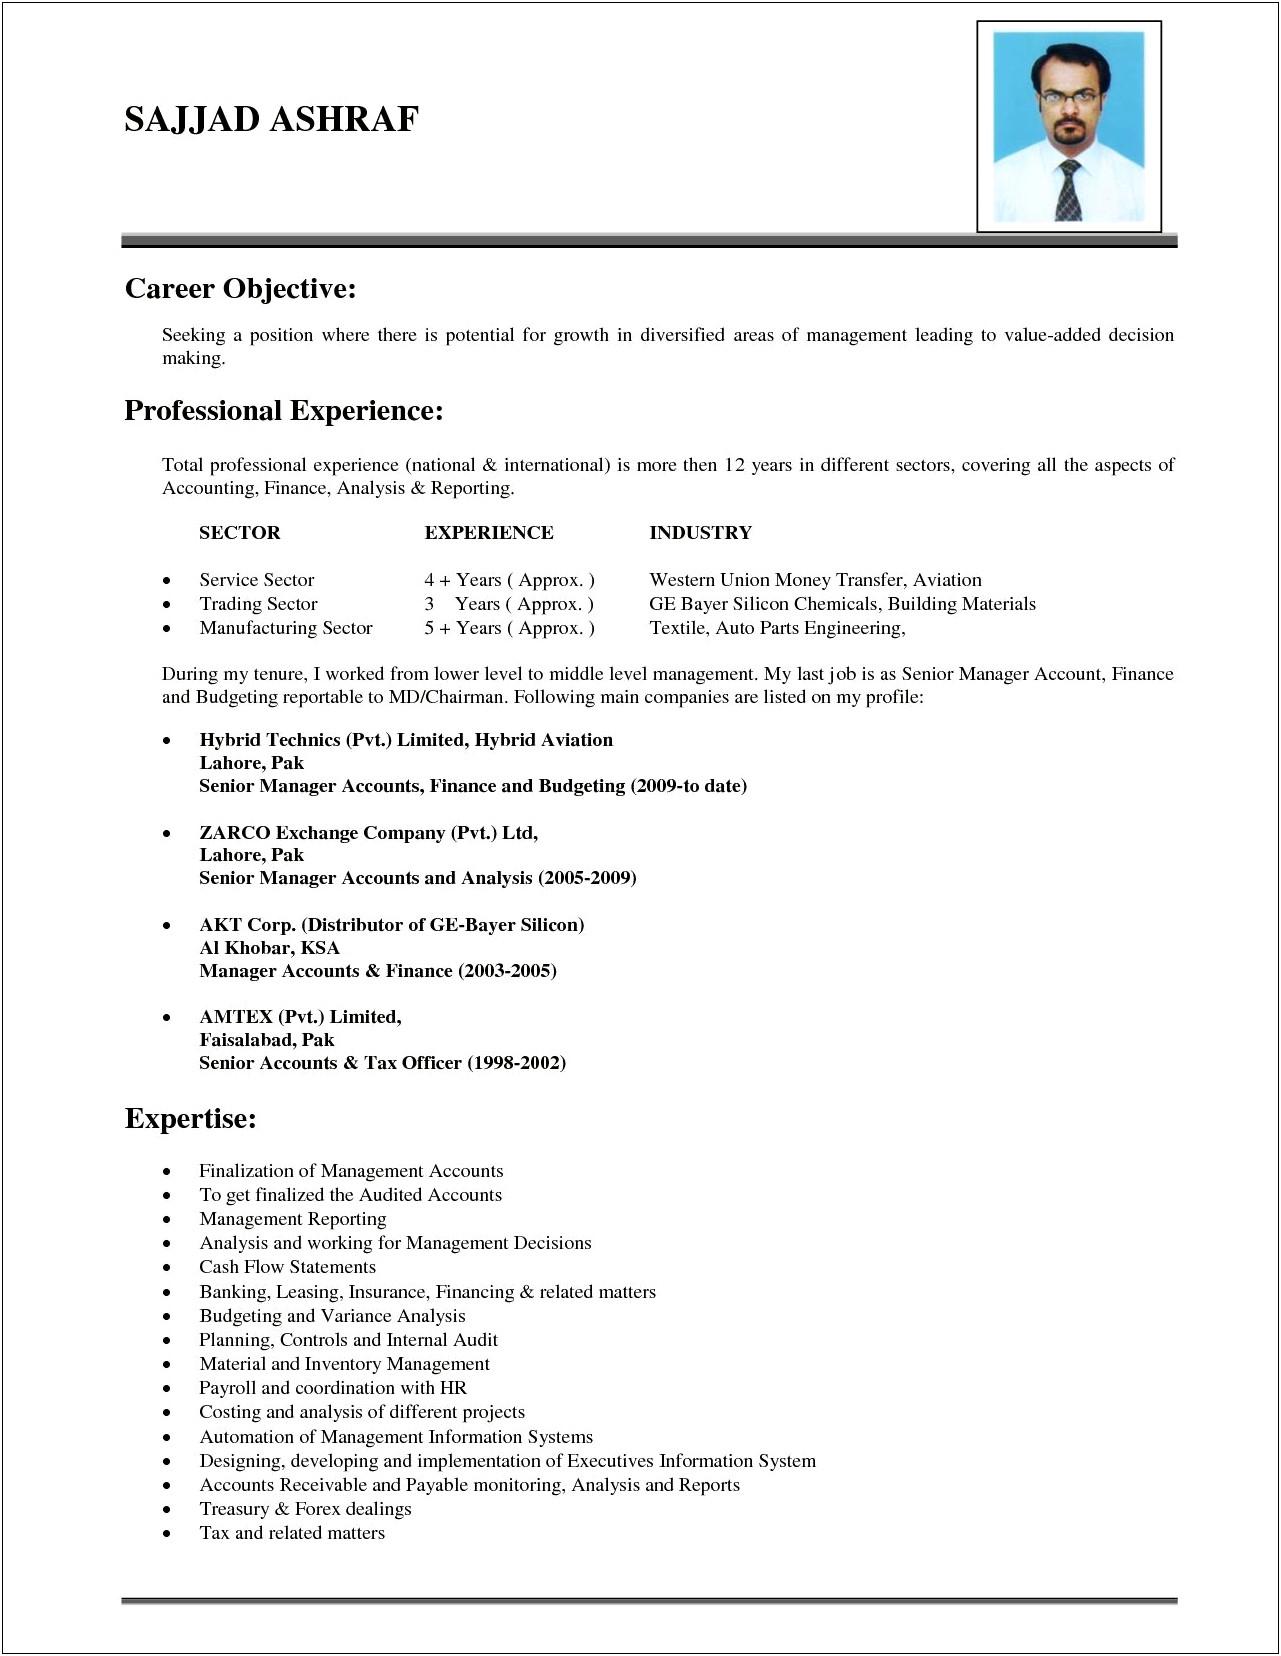 Resume Objective Statement Business Industry